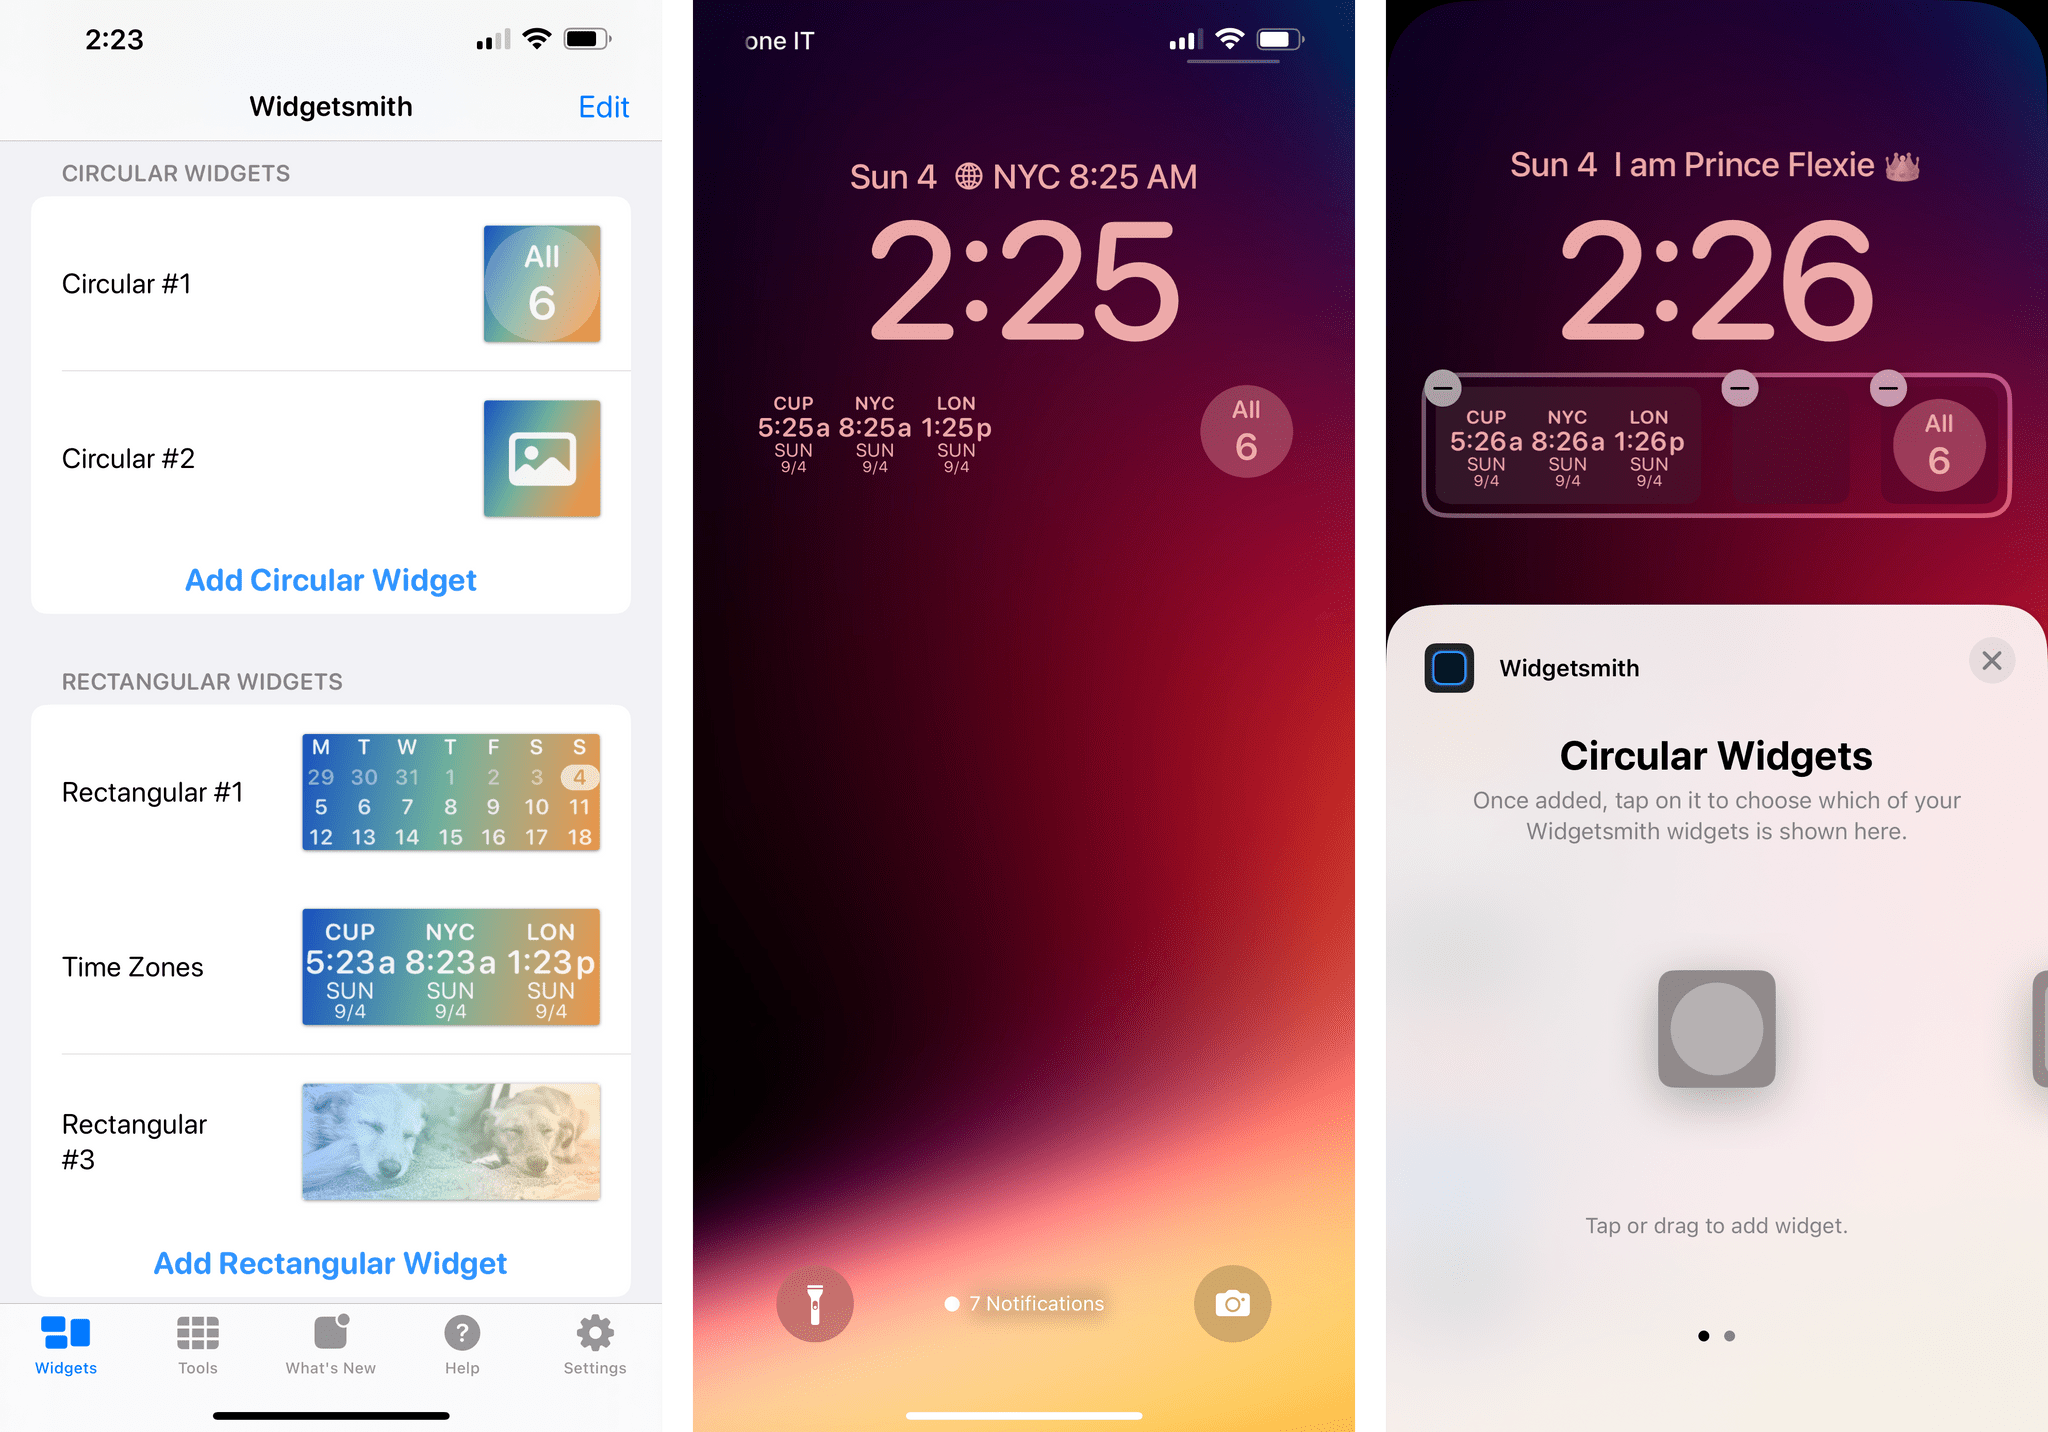 With the latest version of Widgetsmith, you can design your own Lock Screen widgets.